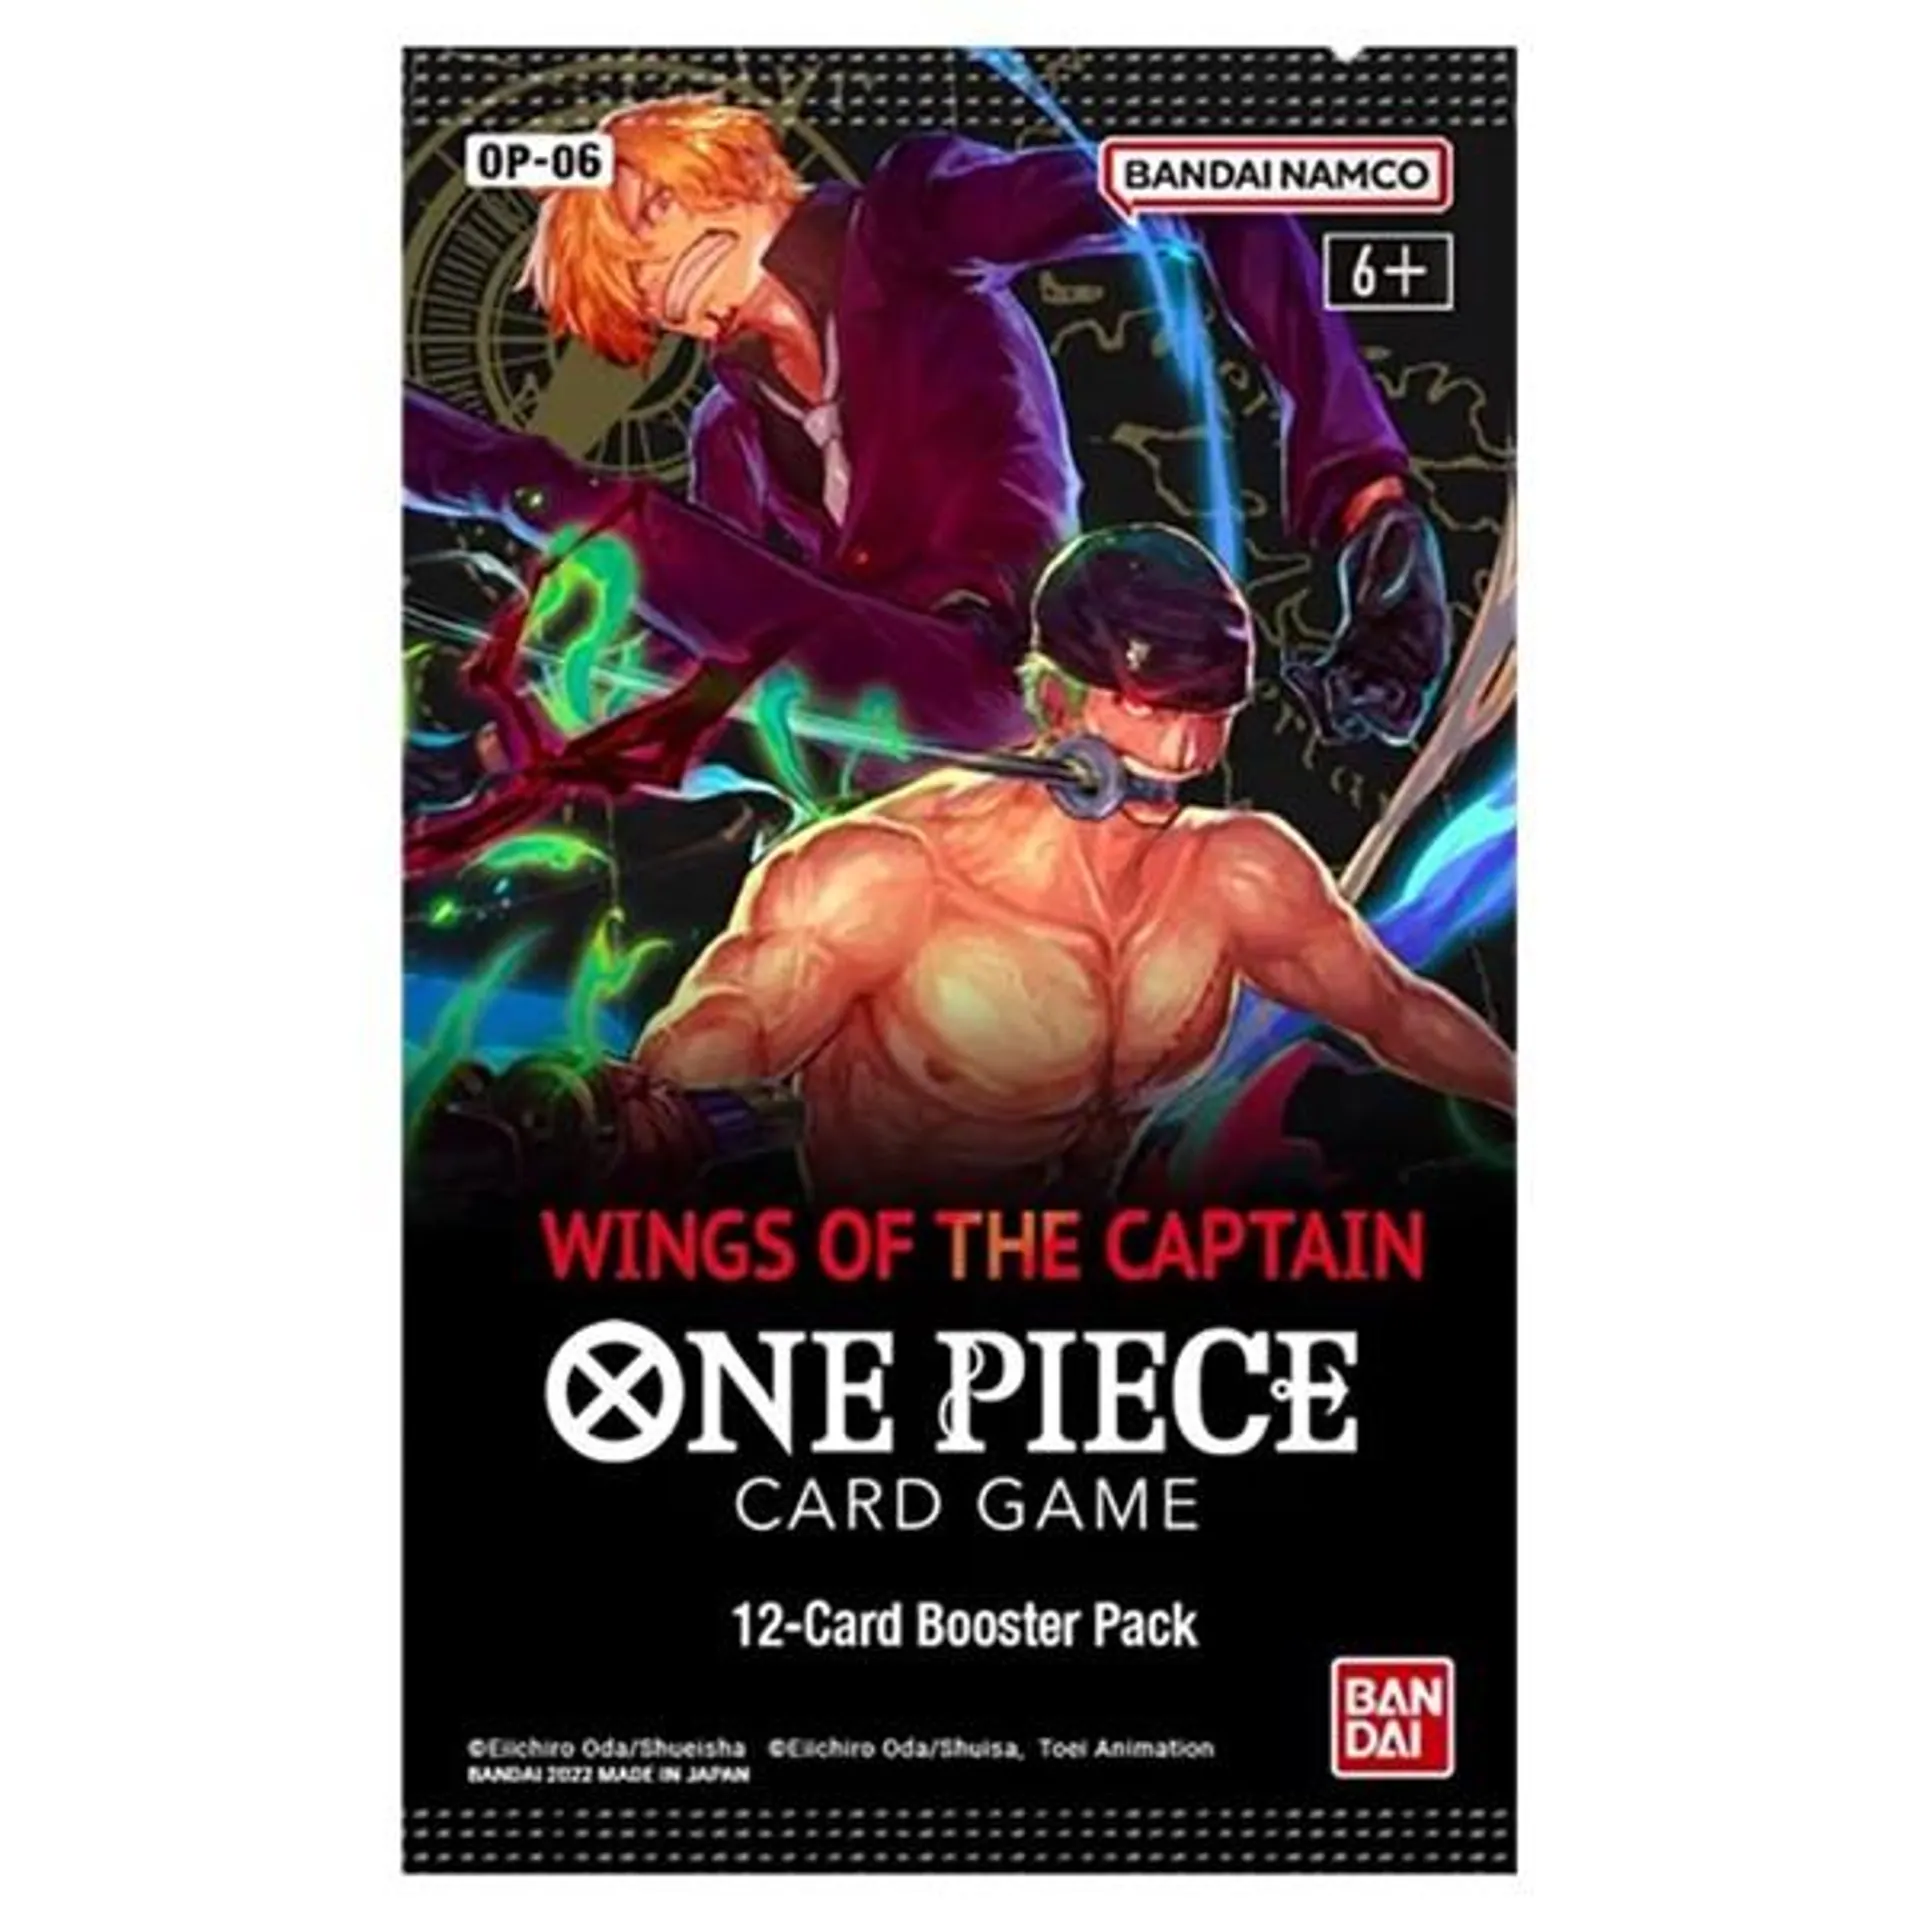 One Piece Card Game - Wings of the Captain Booster Pack OP-06